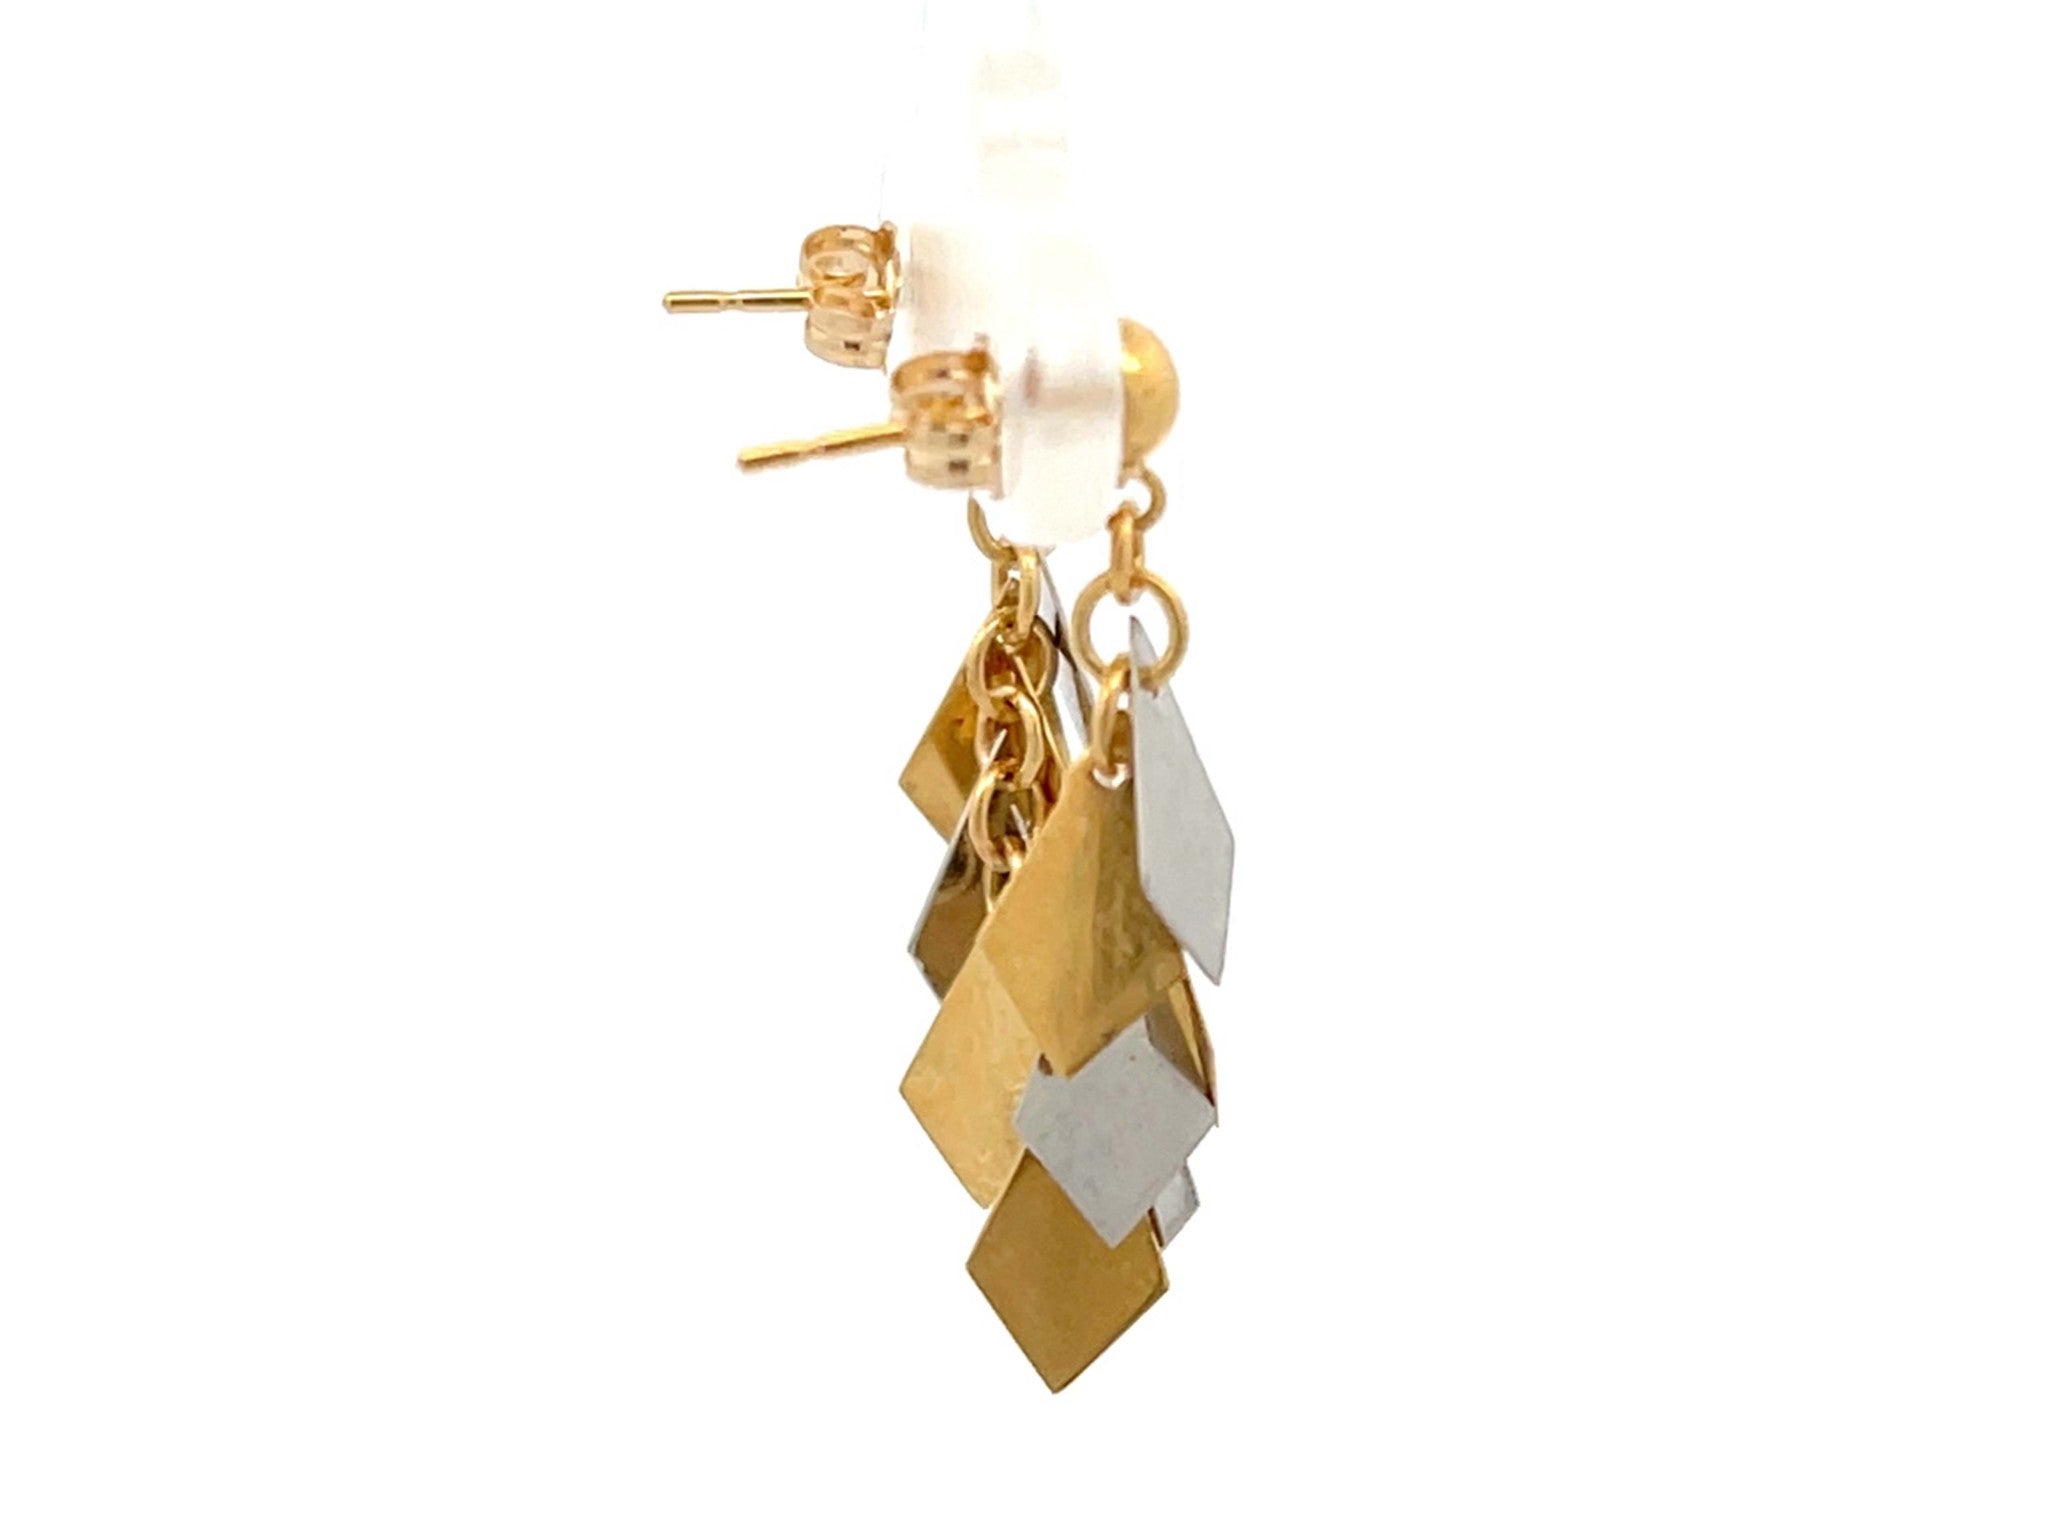 Two Toned Kite Shaped Dangly Earrings in Platinum and 18K Yellow Gold